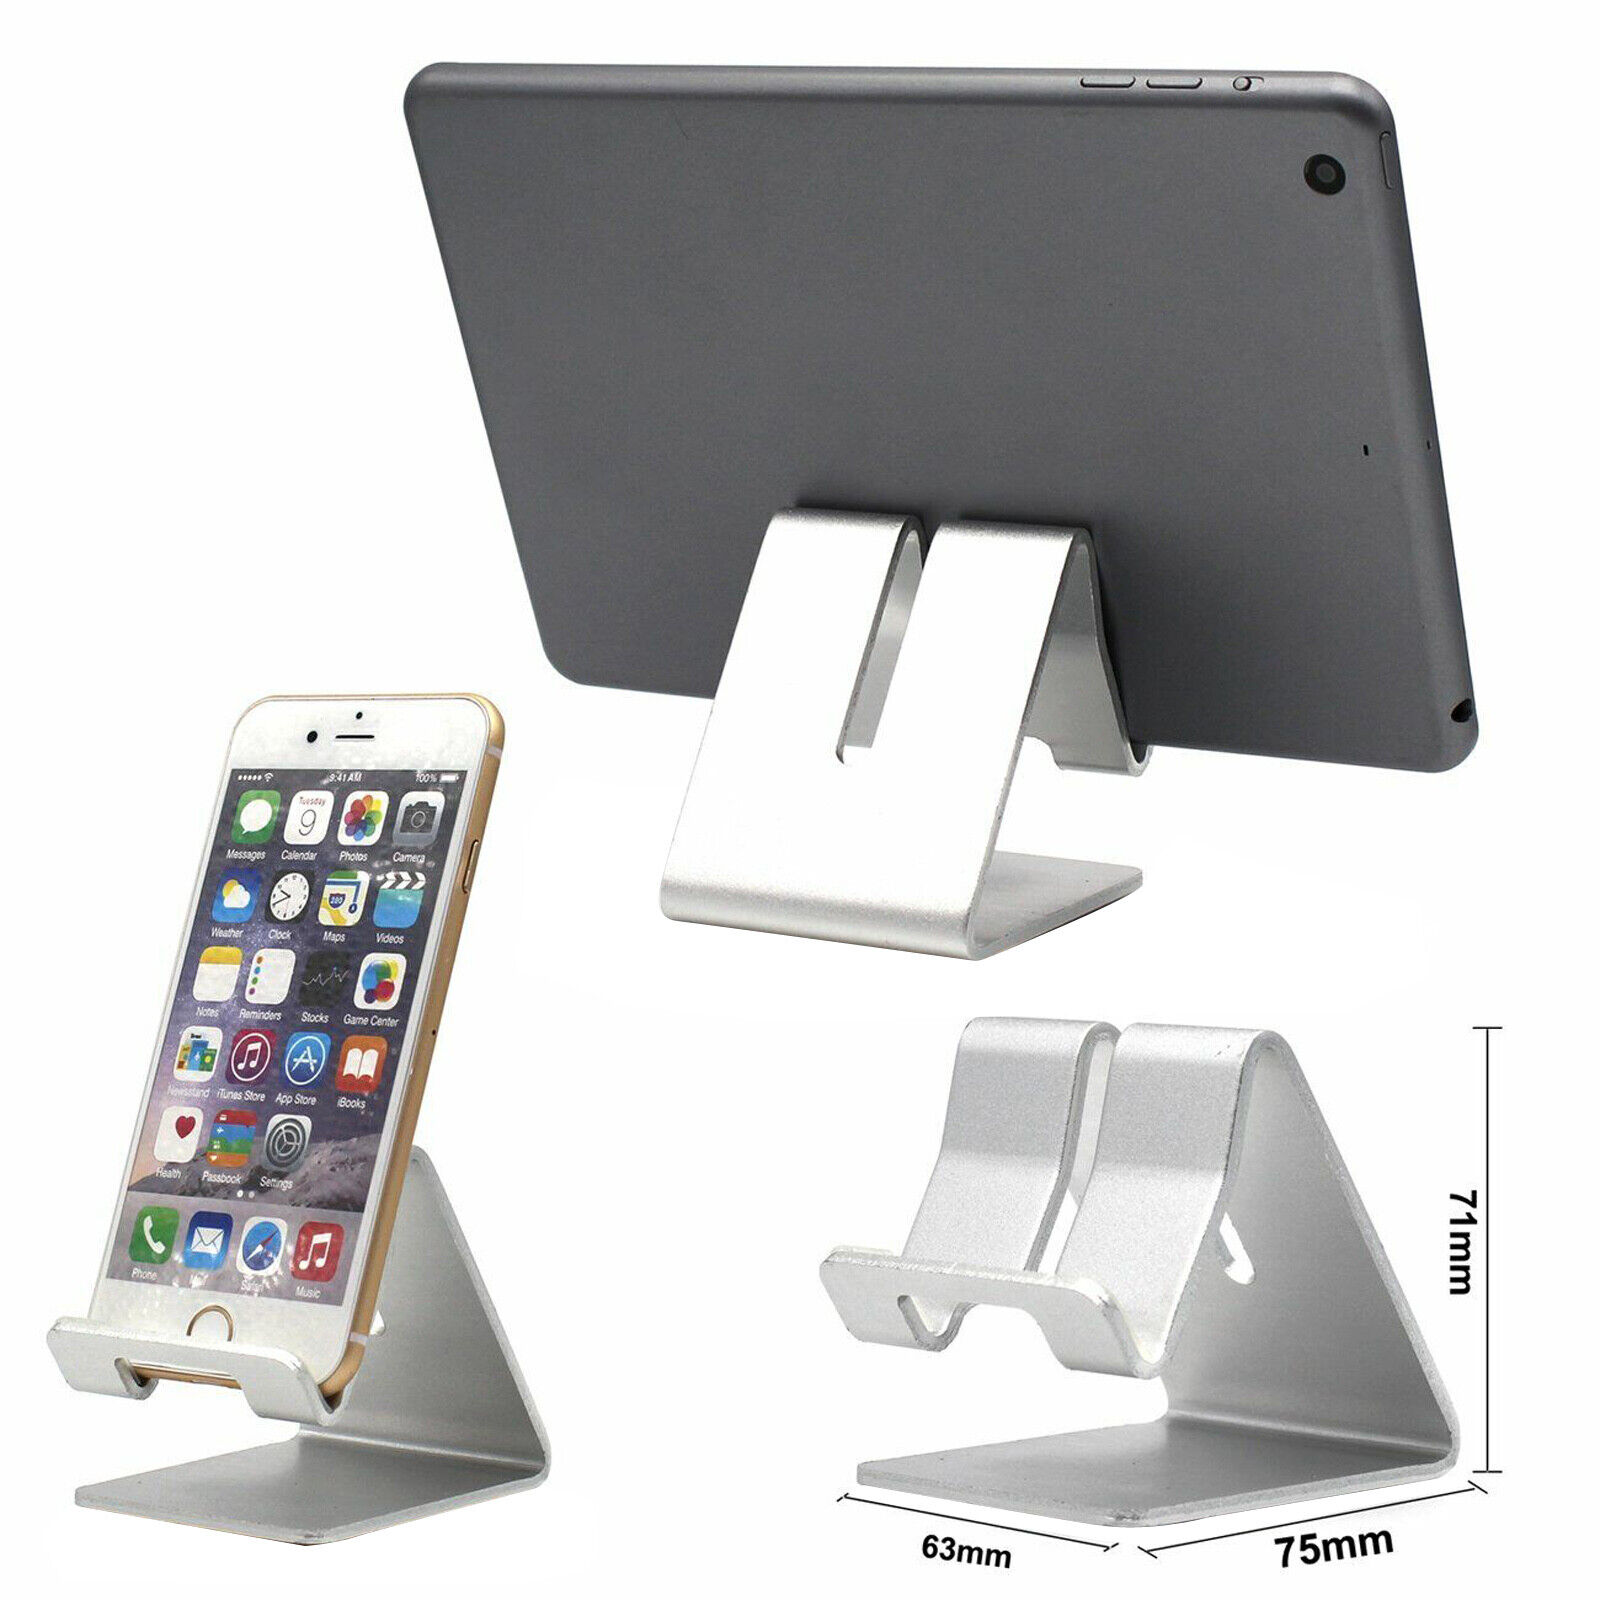 Silver Luxury Aluminium Alloy Metal Holder Stand Mount for Cellphone iPad Tablet